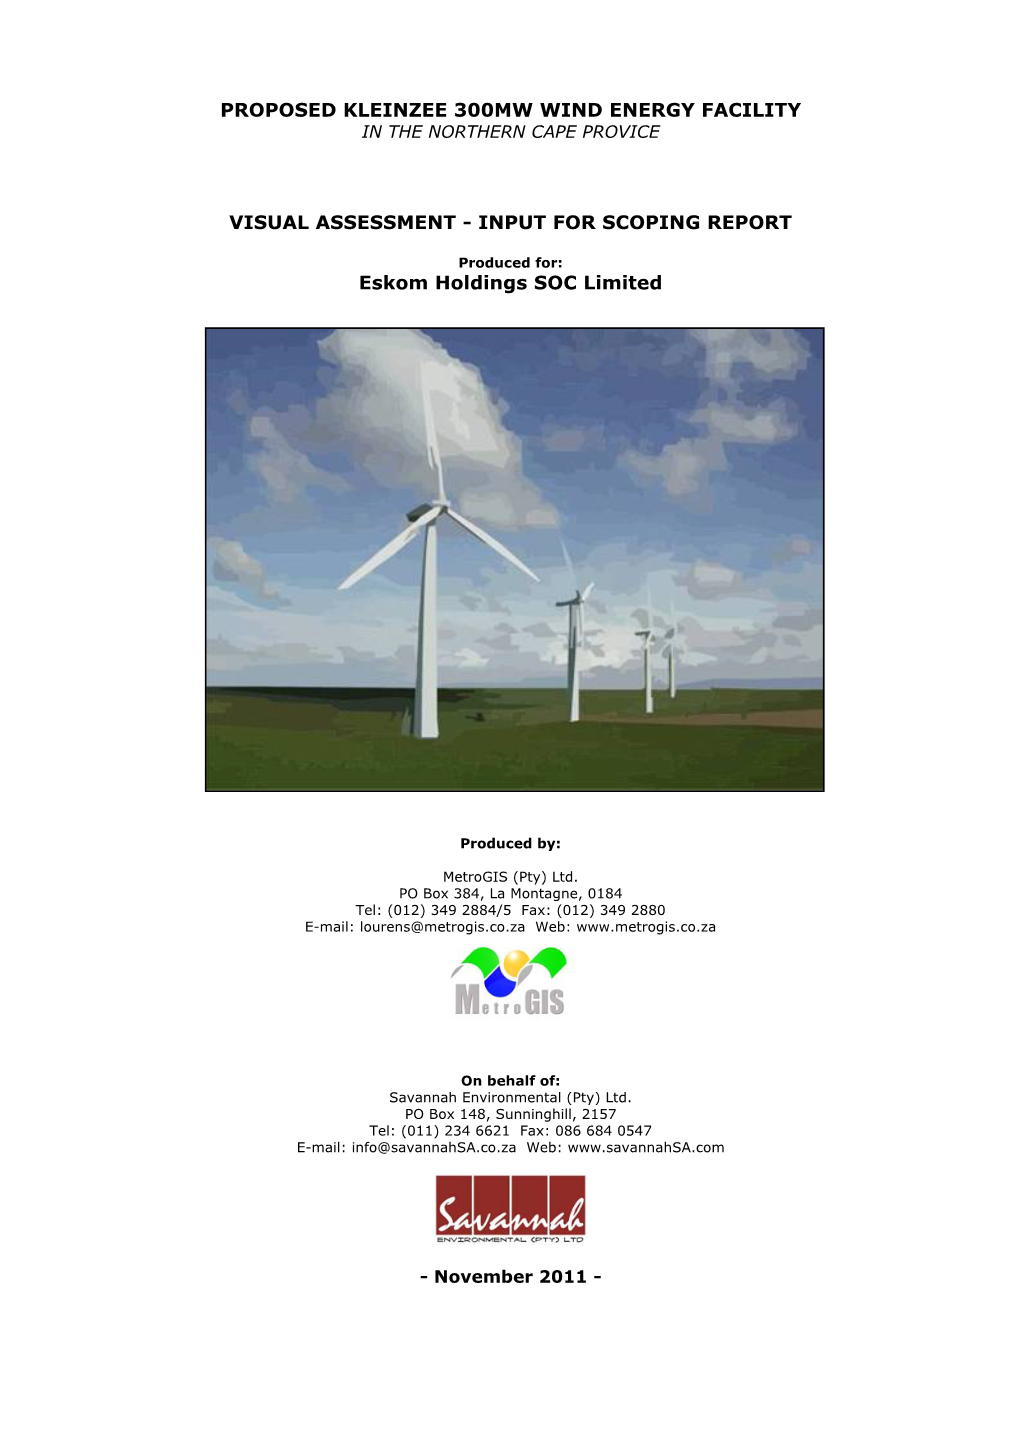 Proposed Kleinzee 300Mw Wind Energy Facility Visual